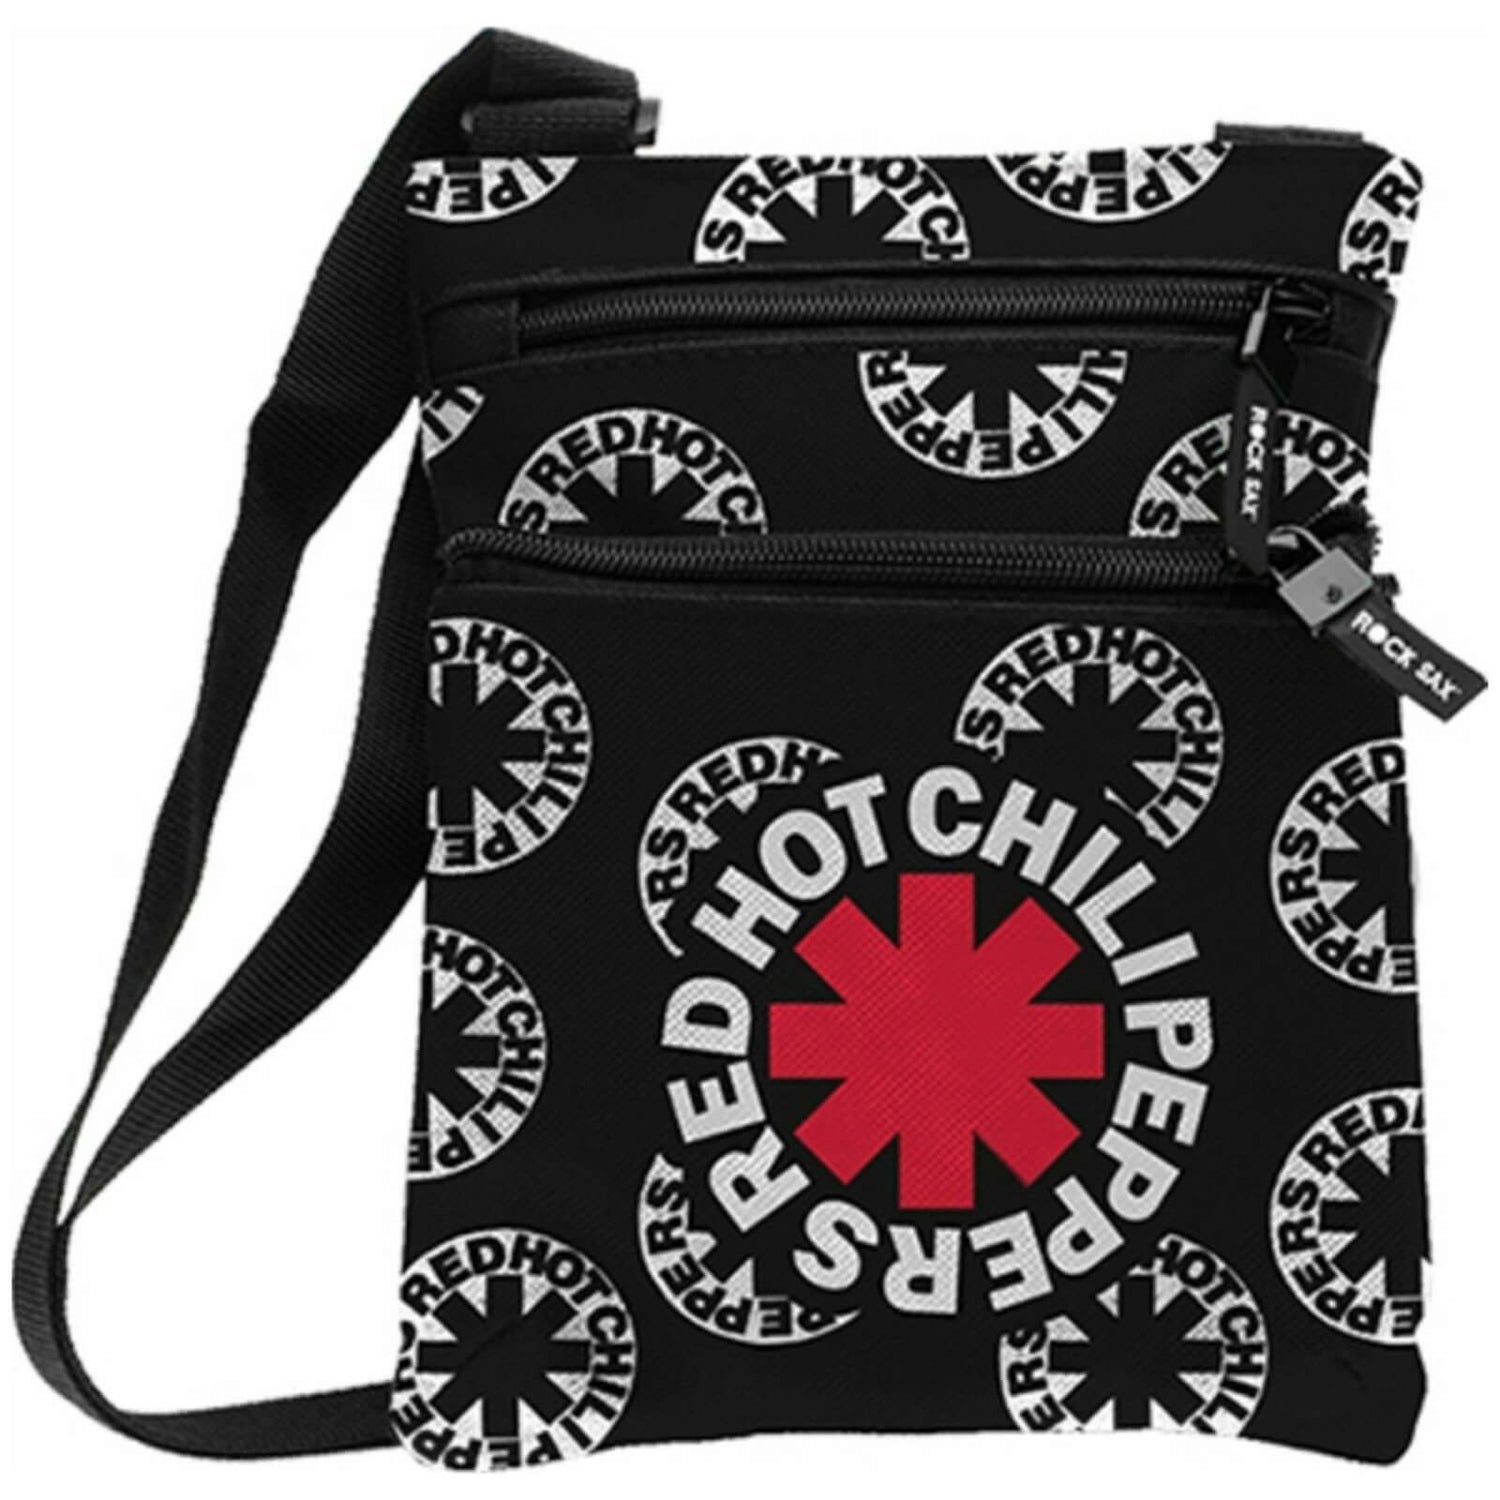 Rocksax Red Hot Chili Peppers Asterix Body Bag